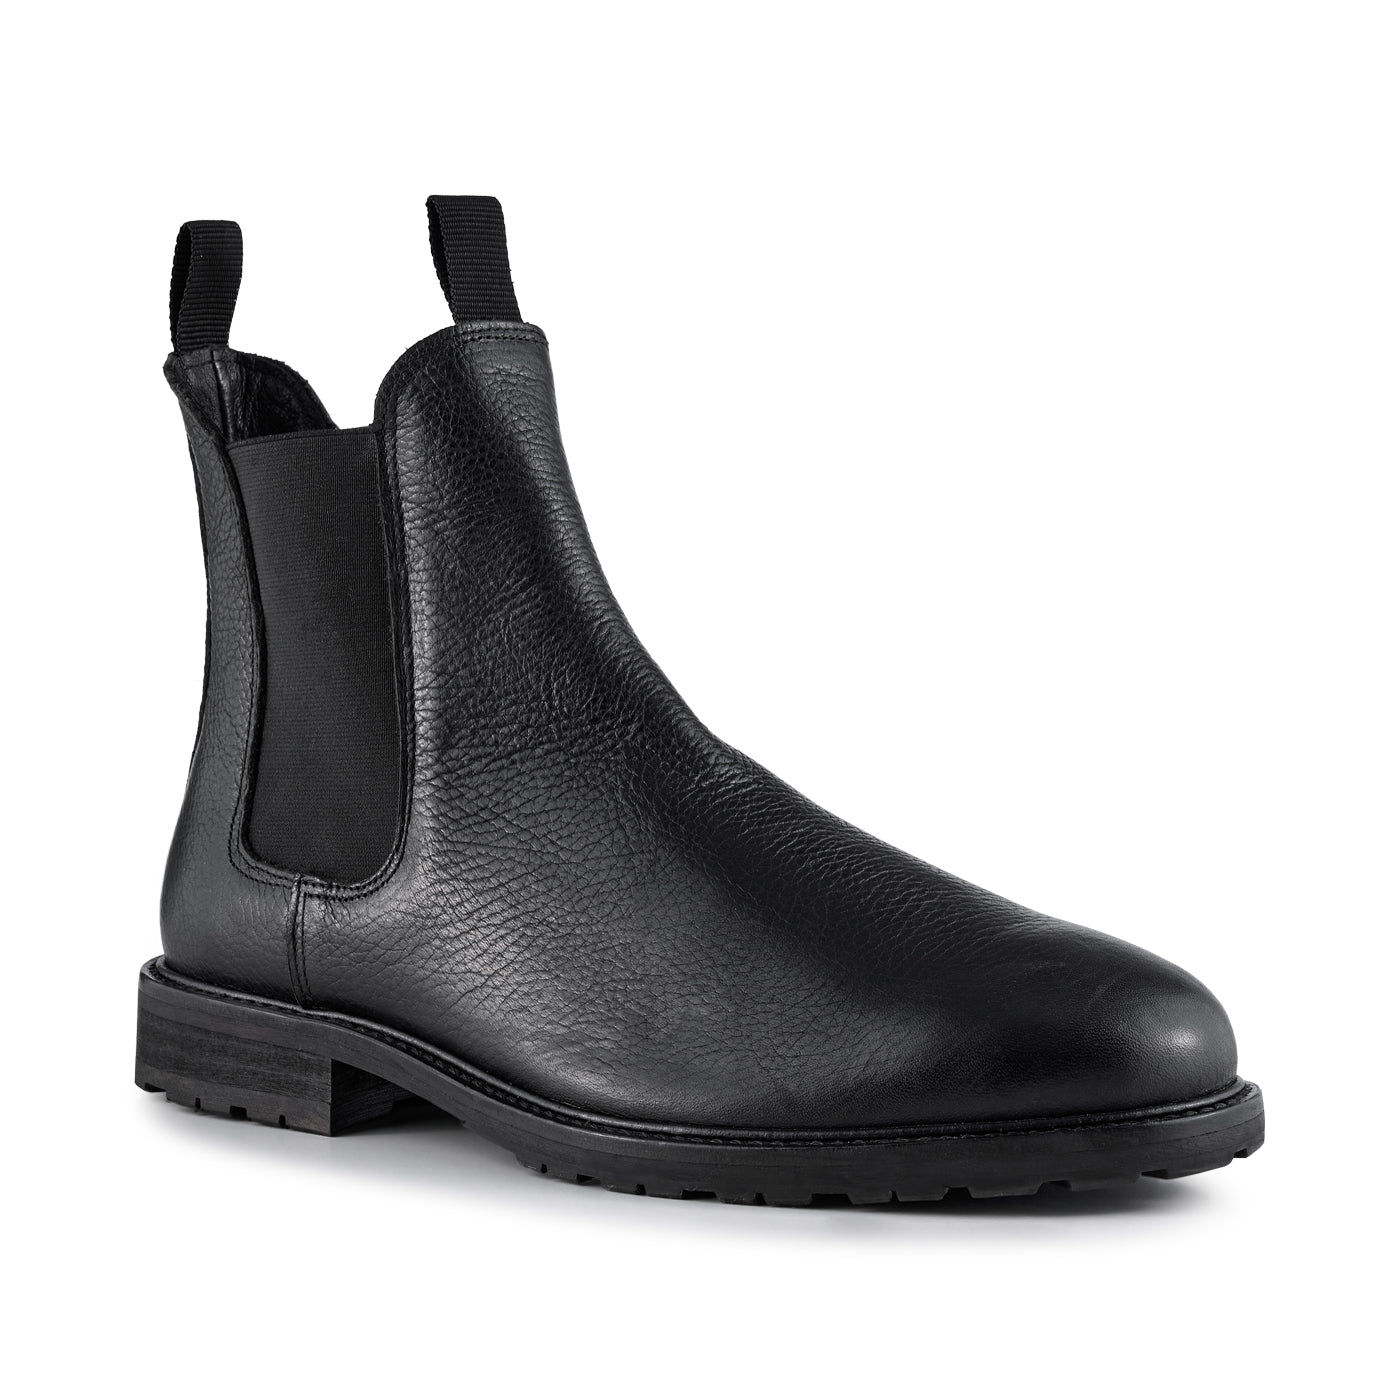 SHOE THE BEAR MENS York chelsea boot leather Boots 110 BLACK